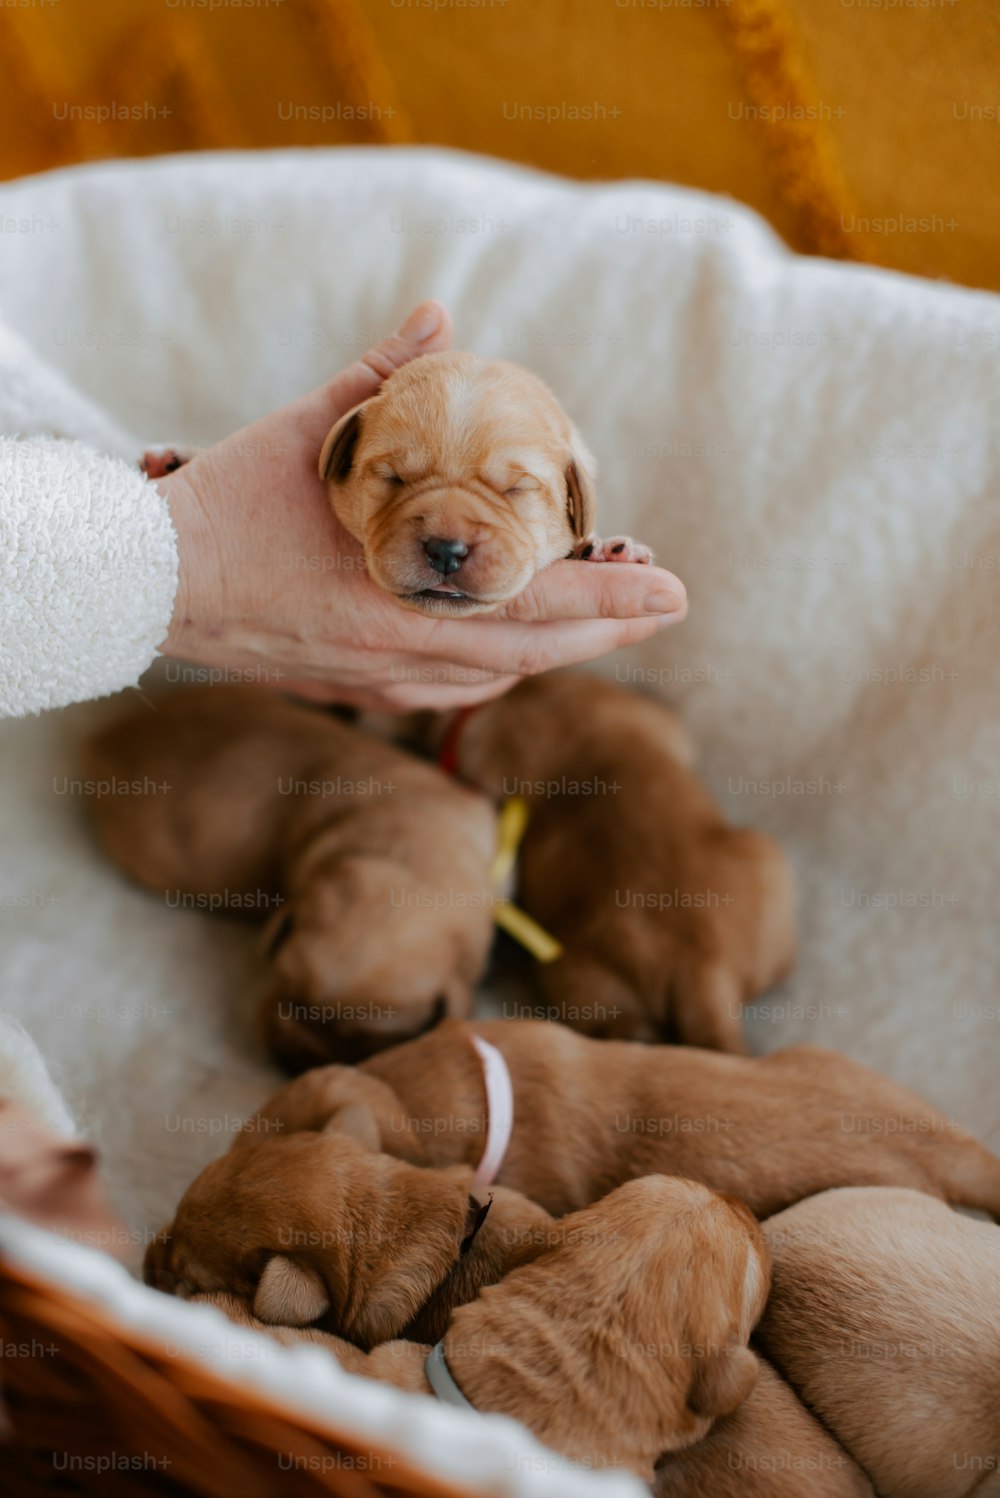 a person holding a basket full of puppies